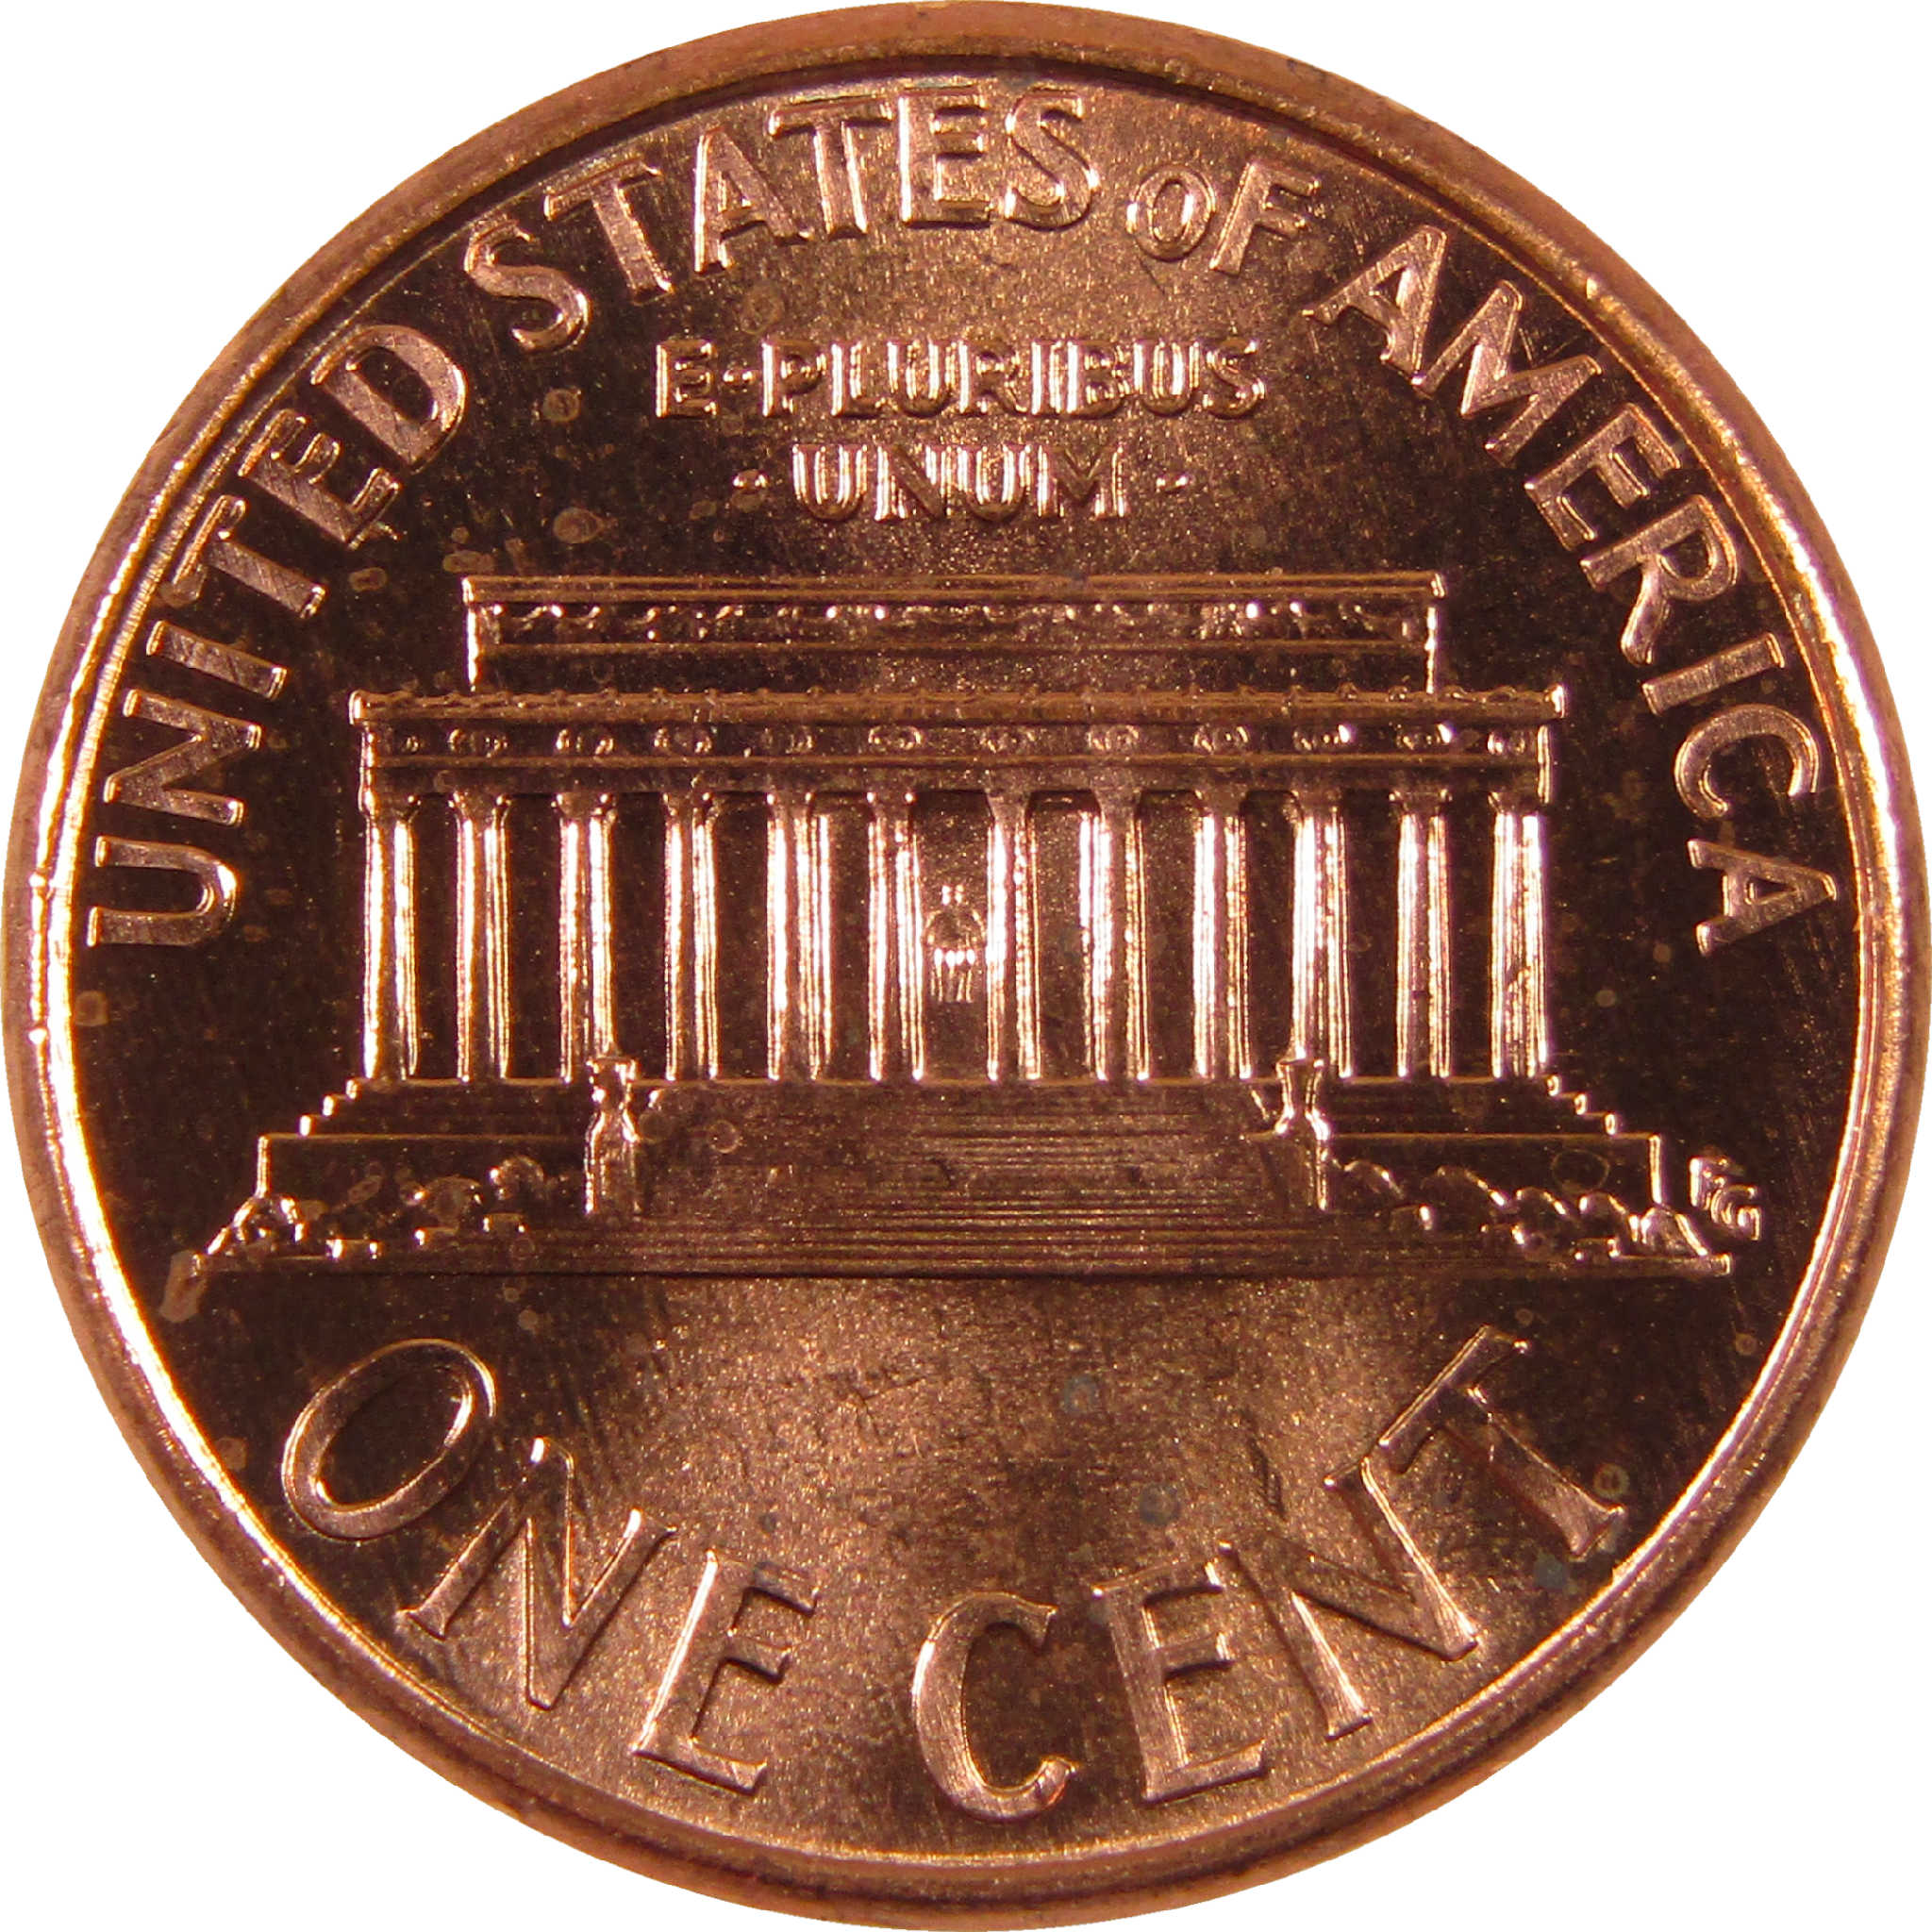 2002 Lincoln Memorial Cent BU Uncirculated Penny 1c Coin